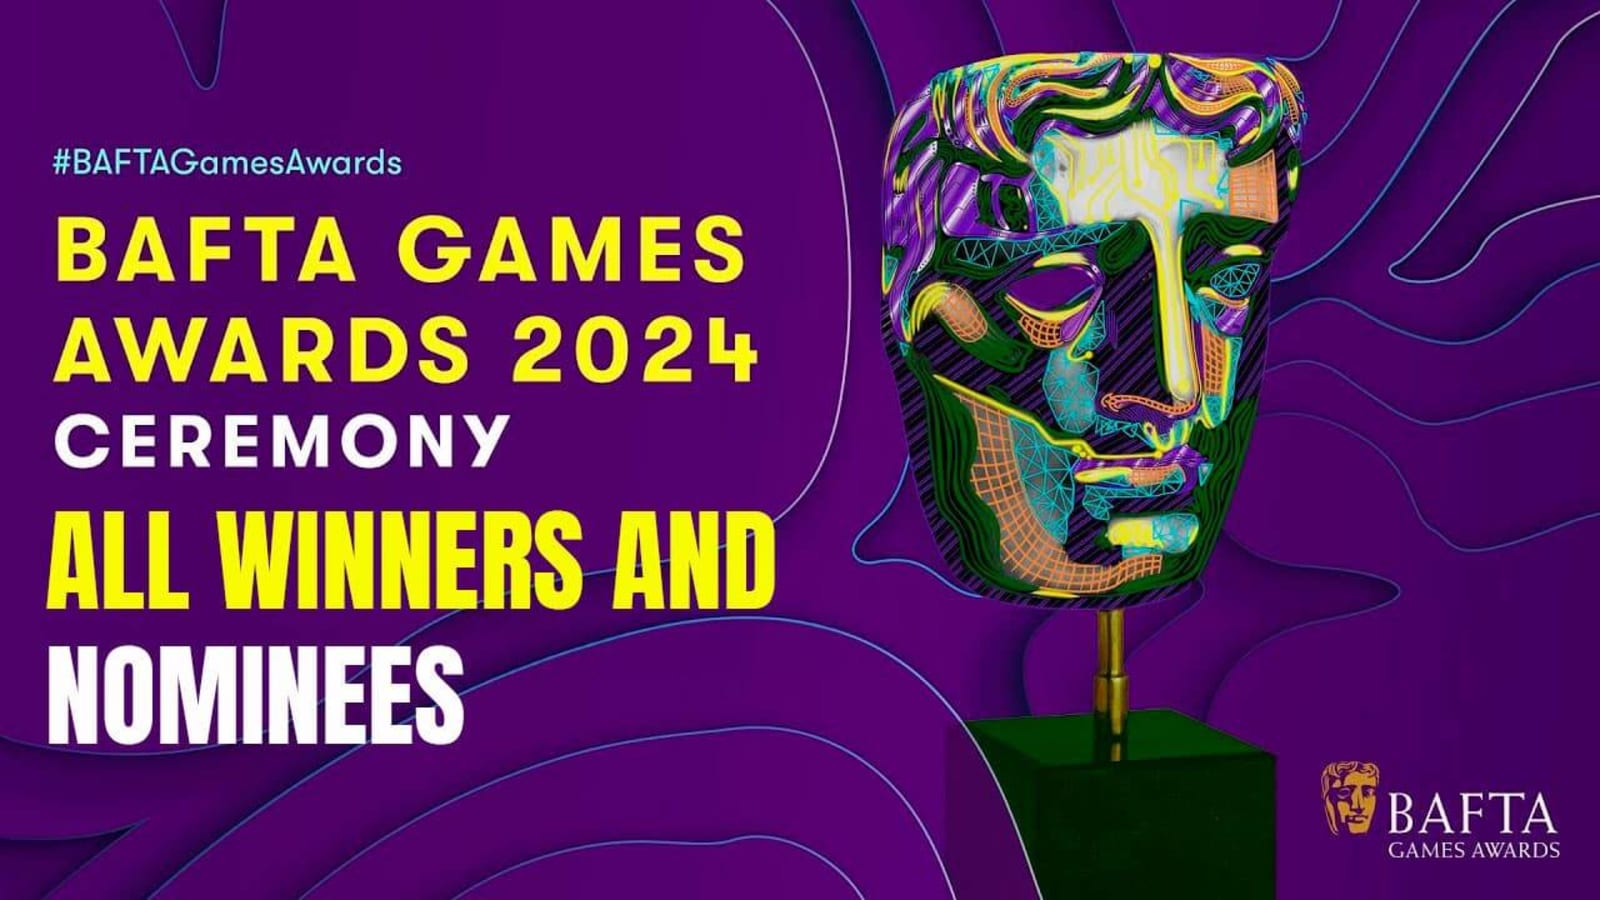 All Winners and Nominees in the 20th BAFTA Games Awards